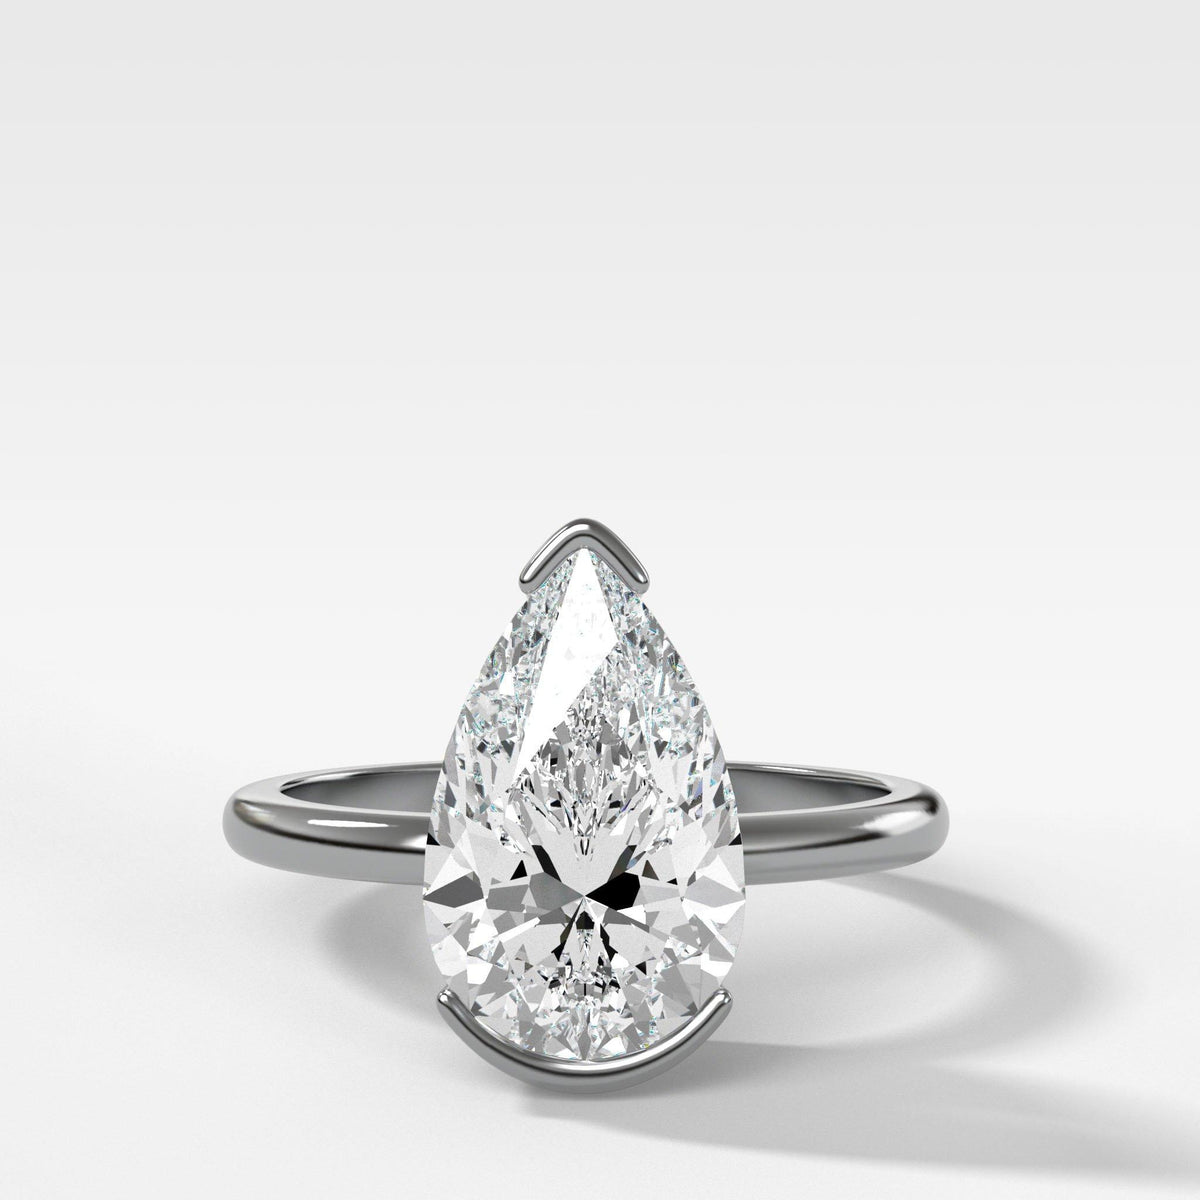 North South Half Bezel Solitaire Engagement Ring With Pear Cut by Good Stone in White Gold